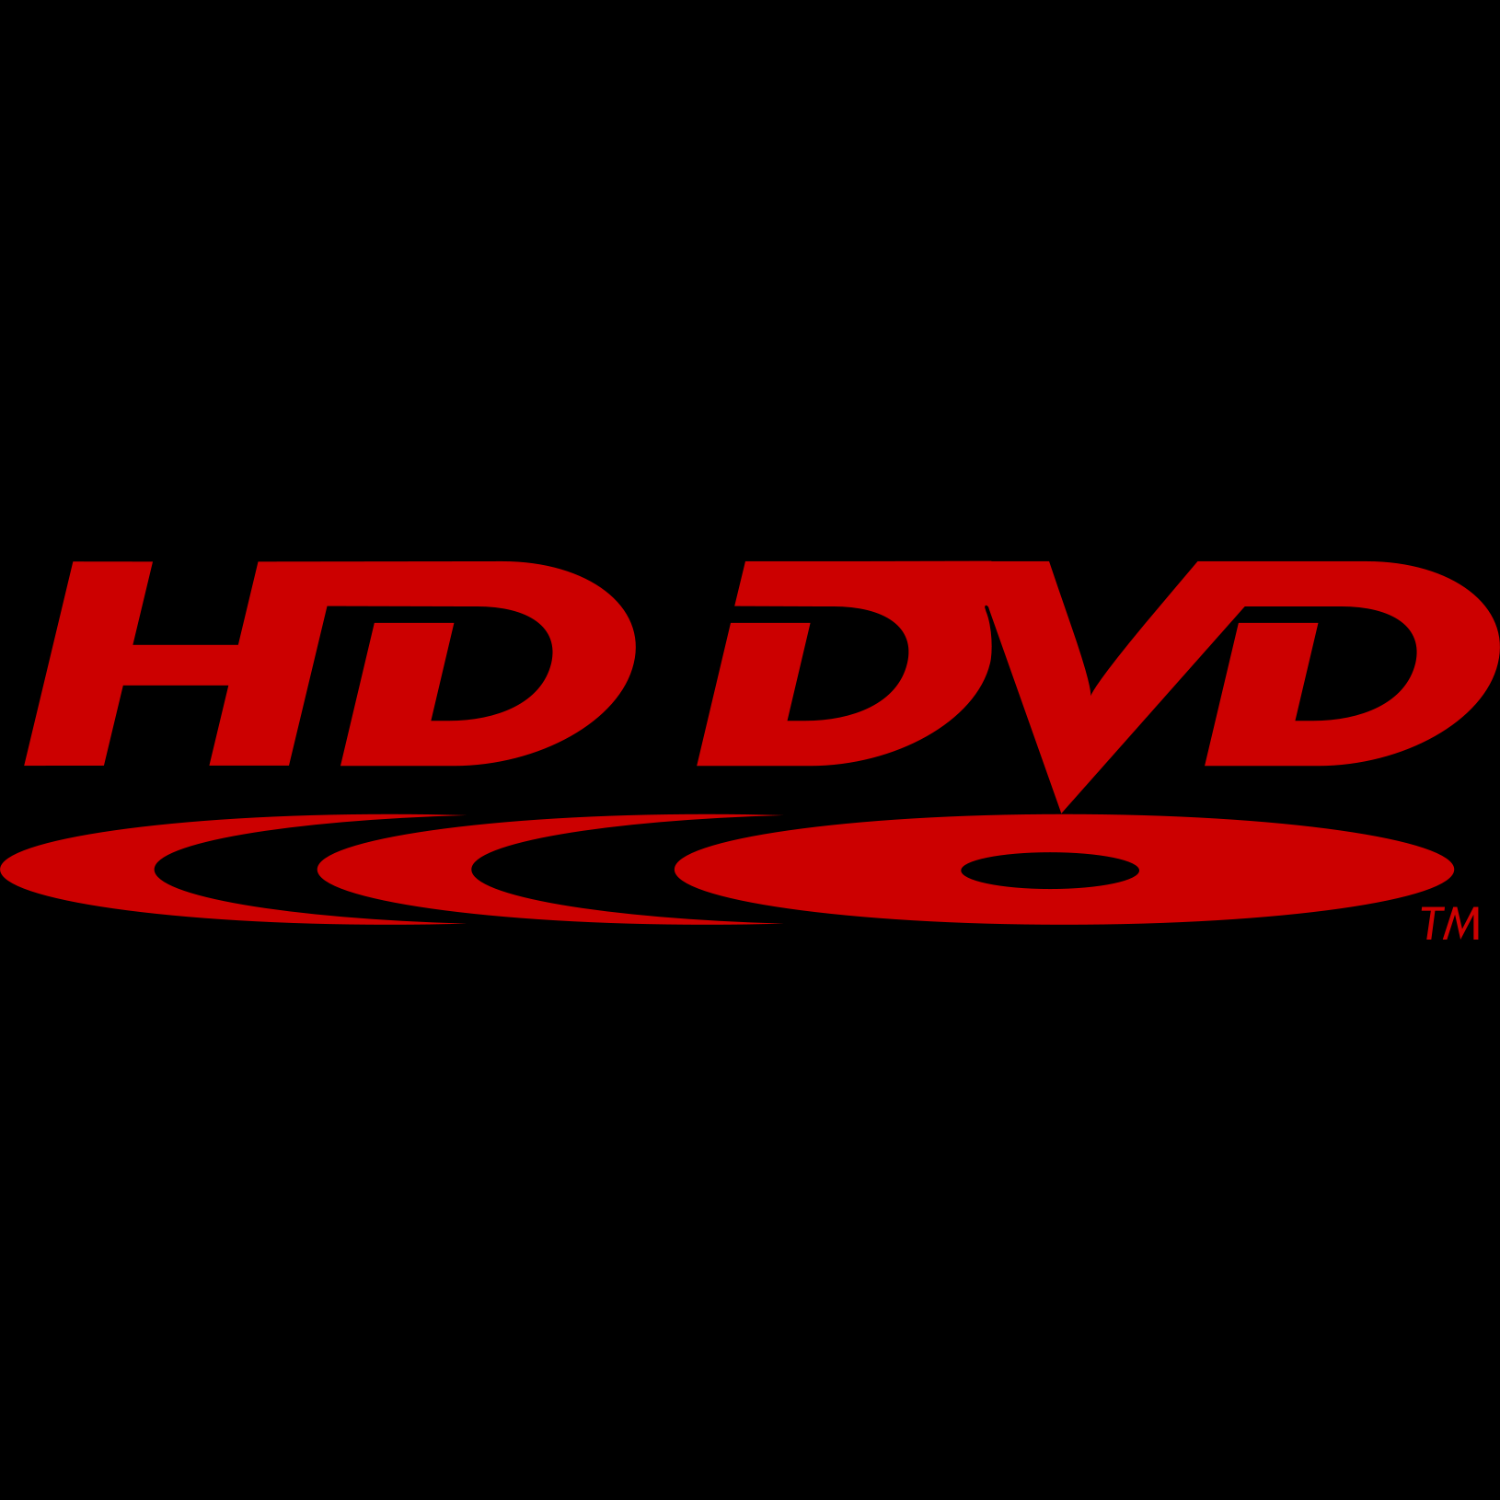 Toshiba HD-DVD HD-A2 Rollback Firmware - HD-A2 Ver 2.7 Rollback - Physical CD  - NEW - UK SELLER